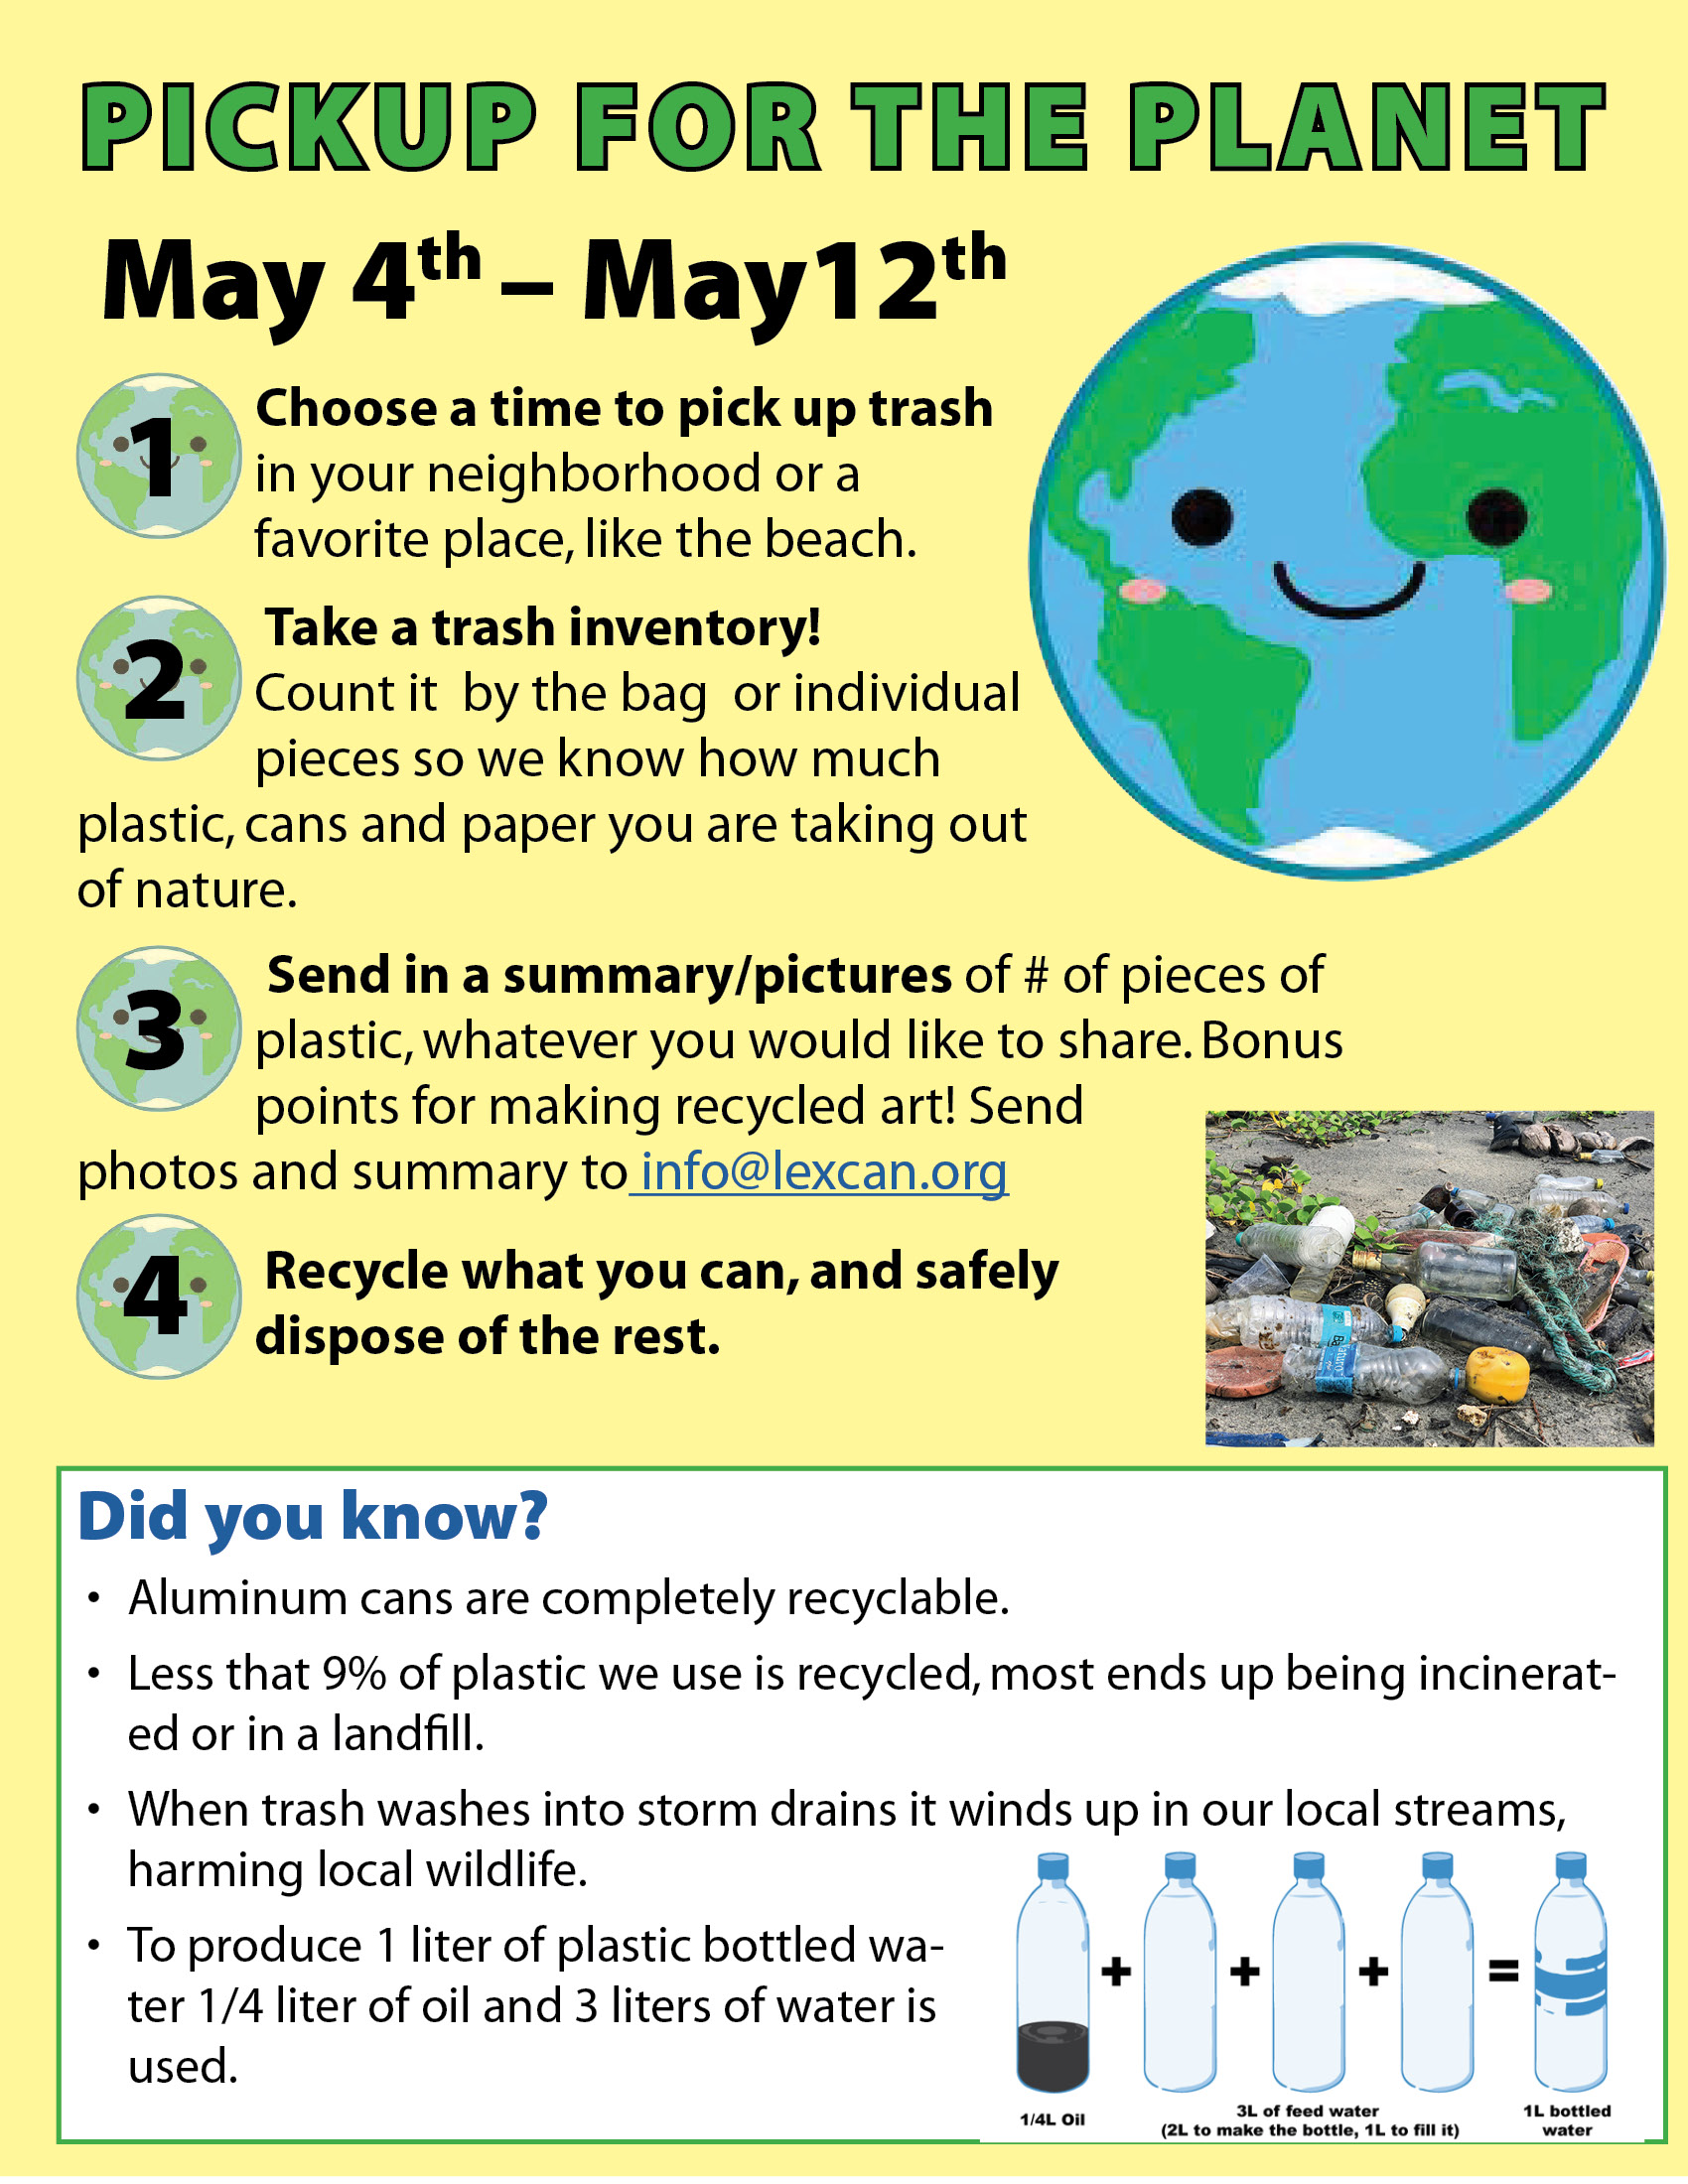 May 4th - May 12th: Pickup for the Planet